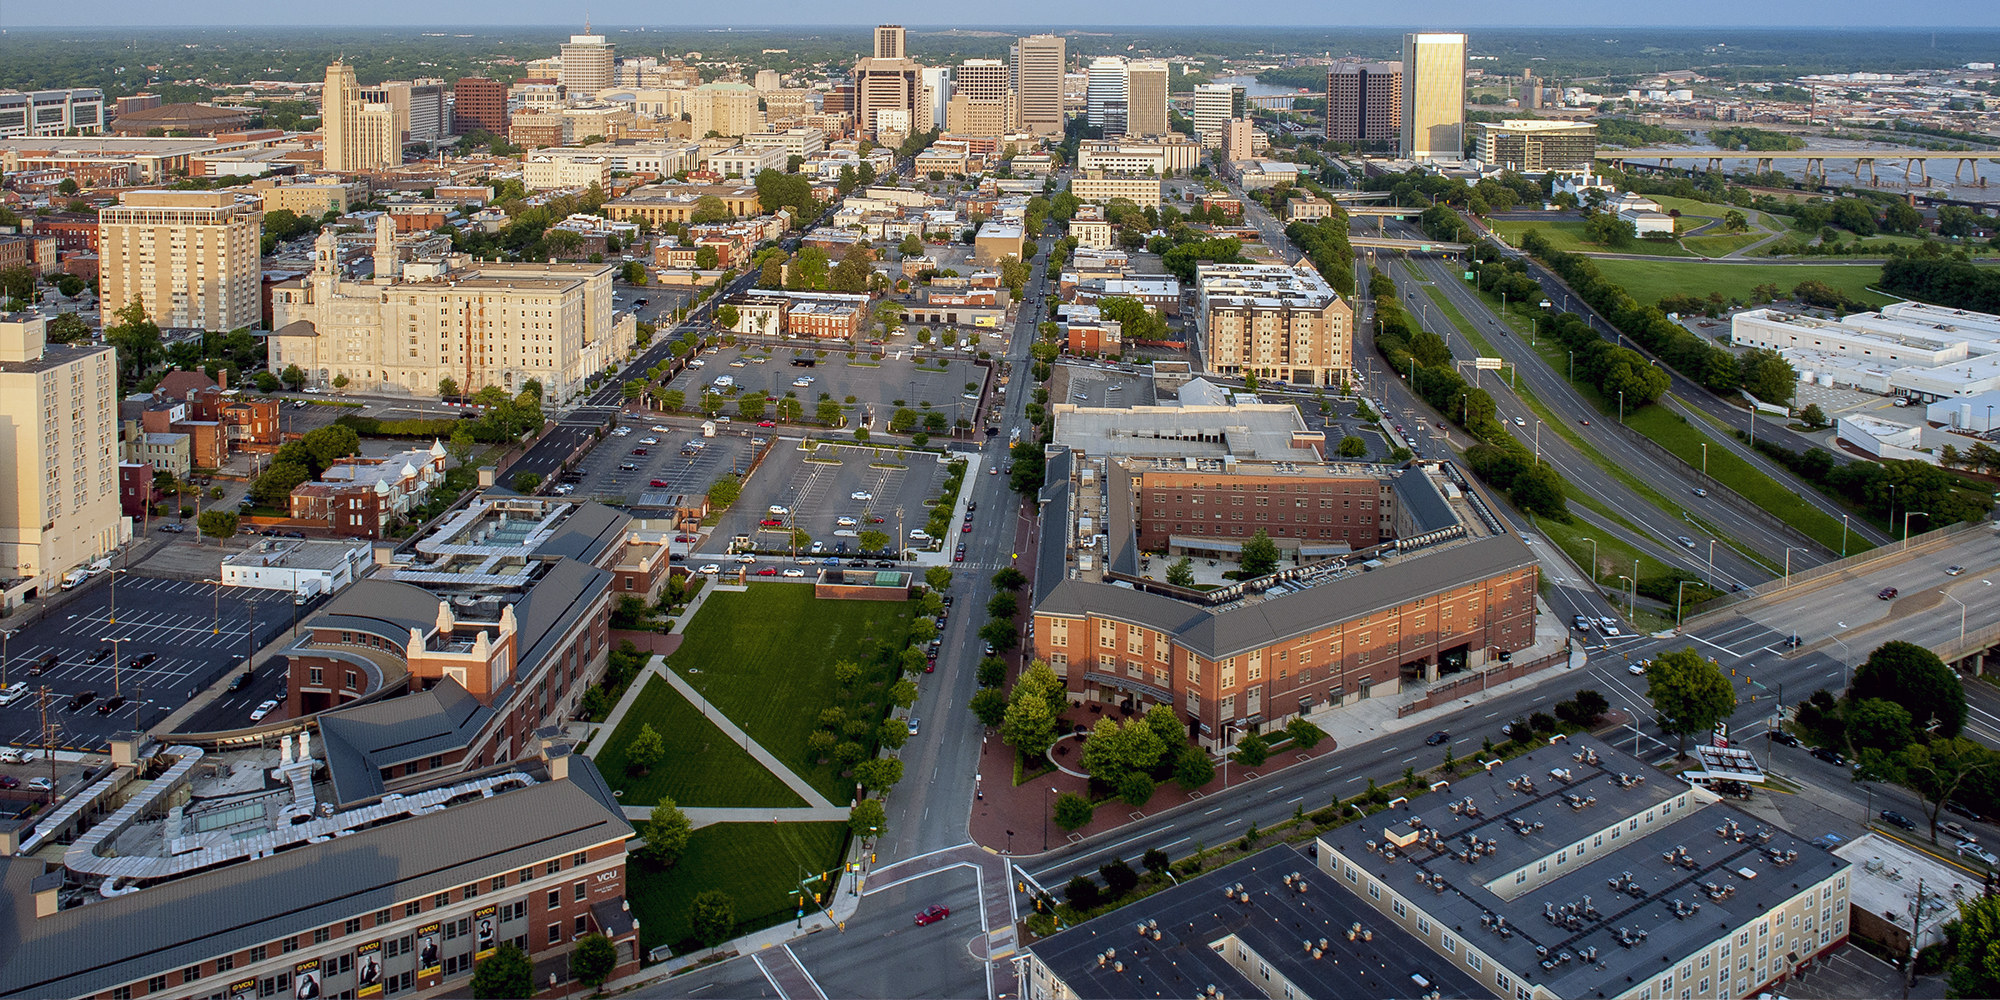 Partial aerial view of the VCU Monroe Park Campus, showing in foreground, School of Engineering East Hall, School of Business Snead Hall, and Brand Center Hughes Hall, Downtown Richmond, VA in the background 